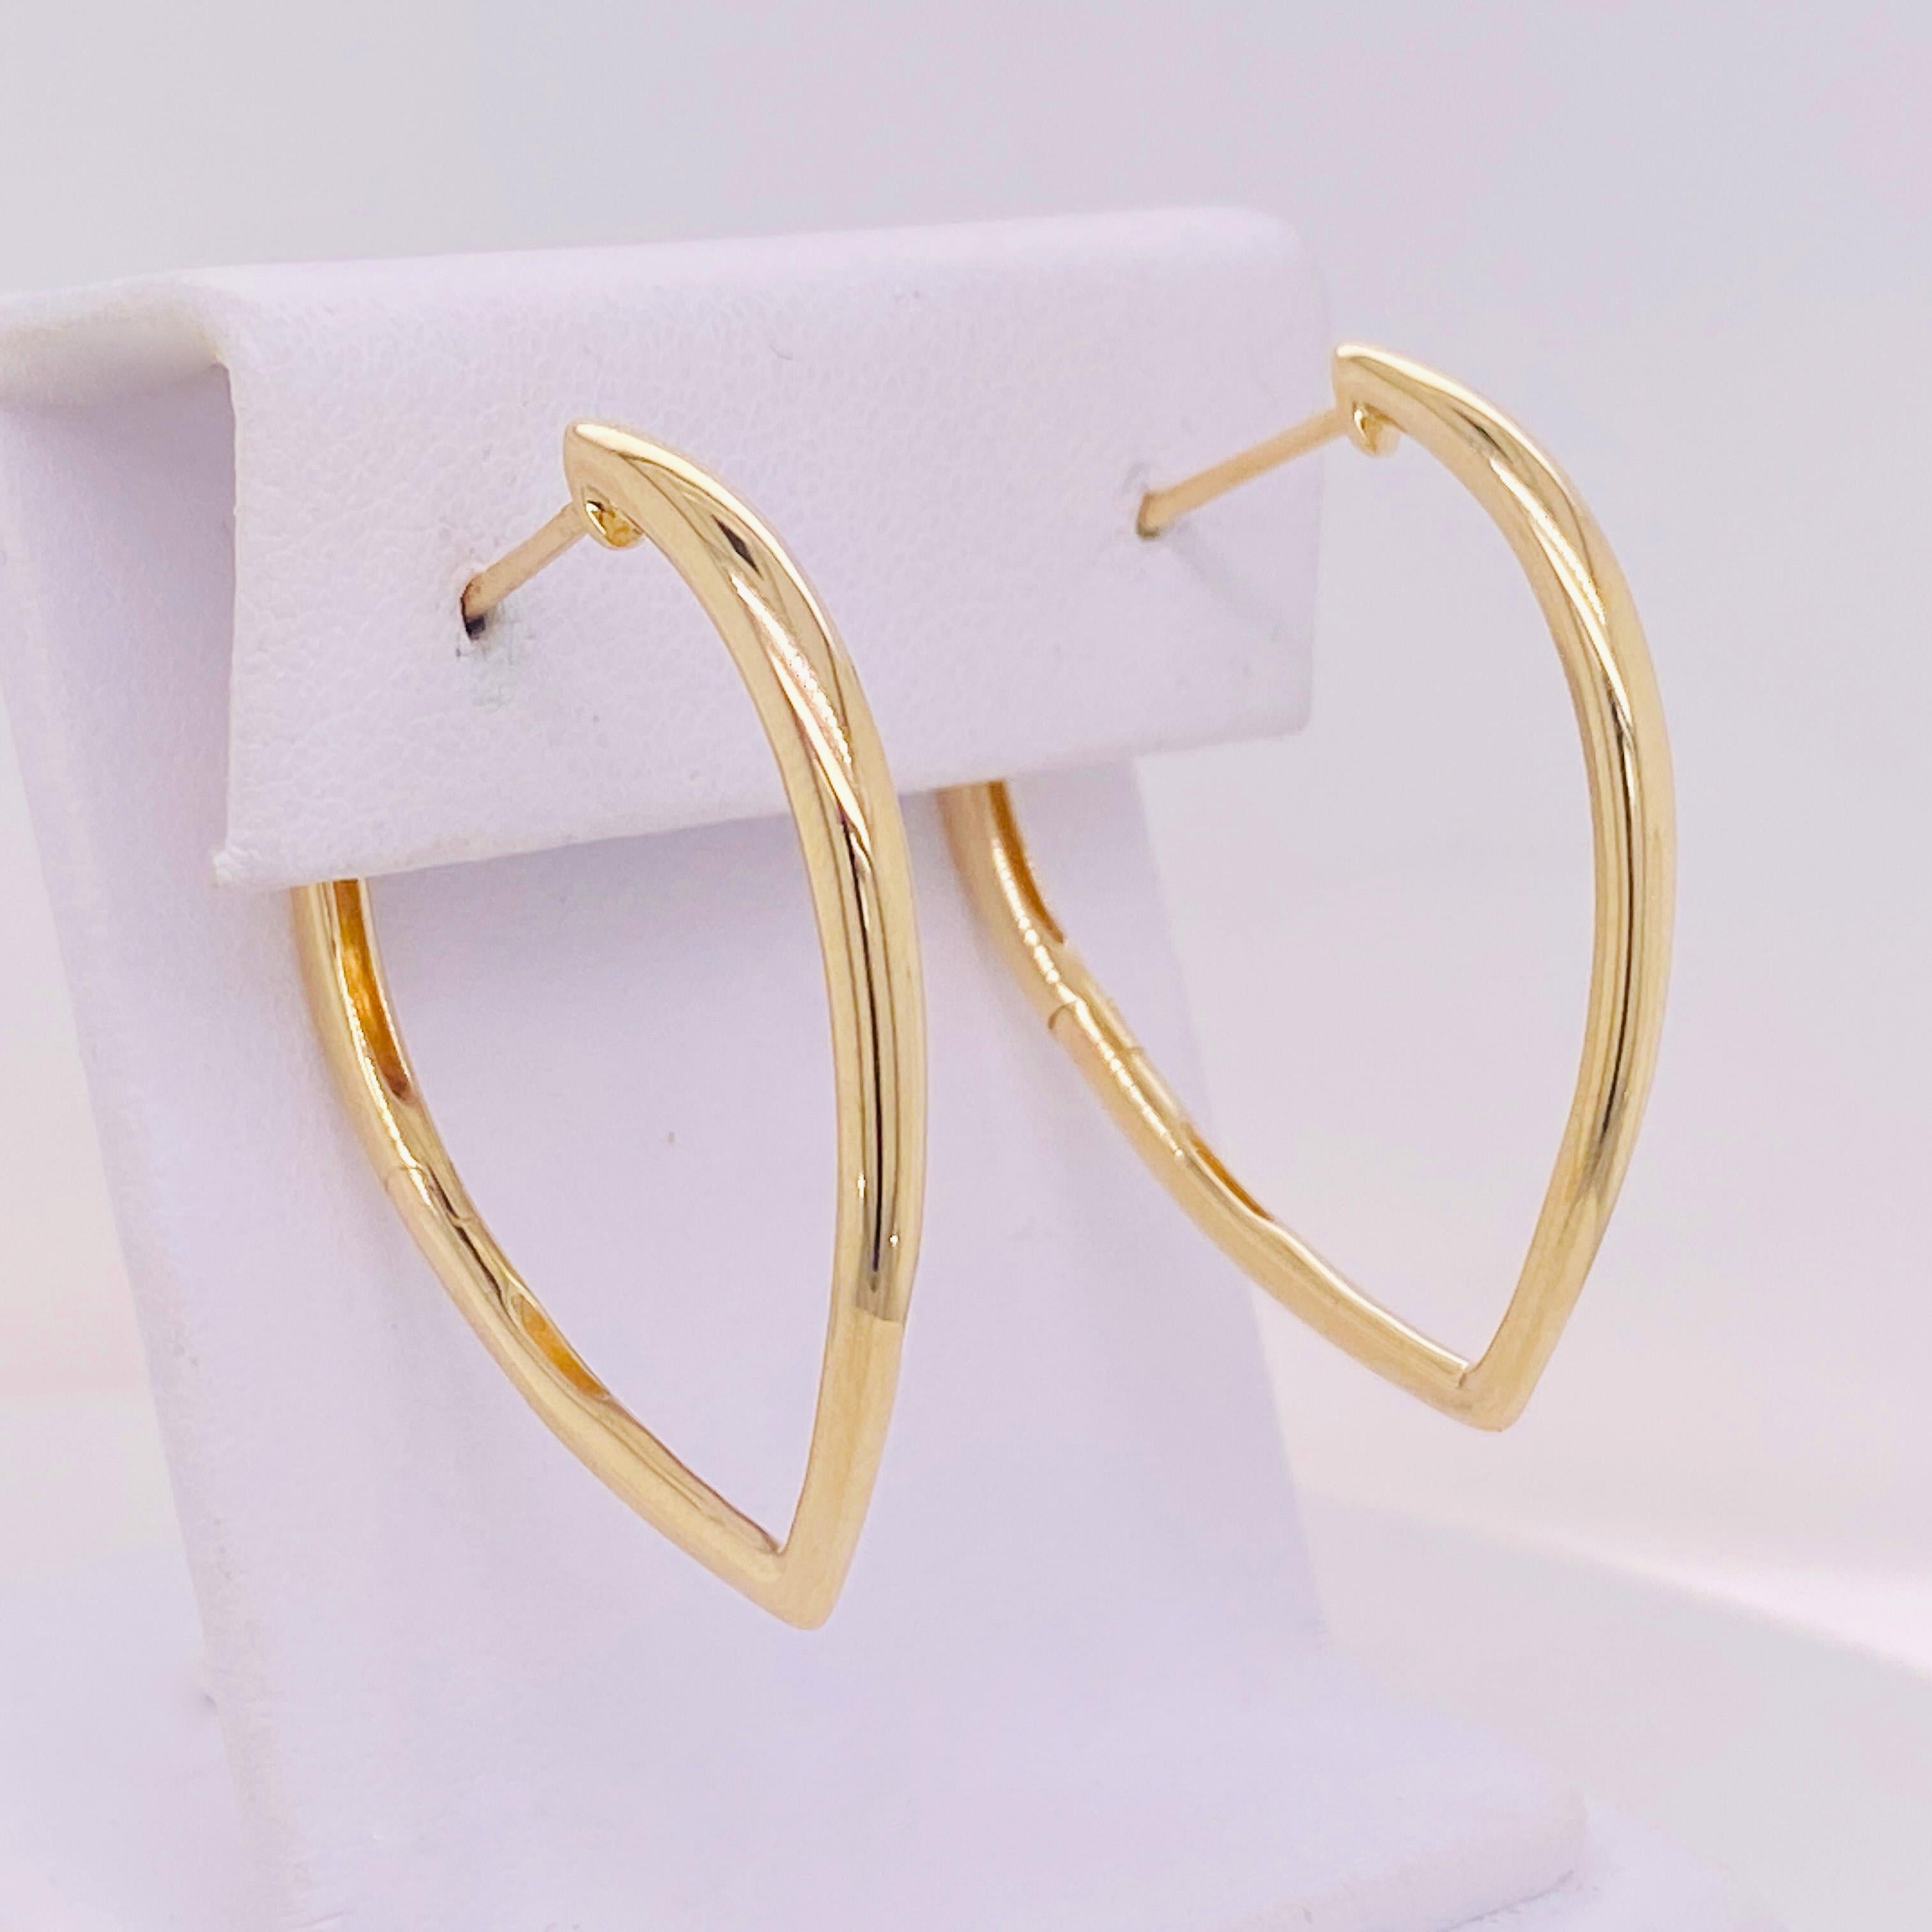 Show your stylish flair with this contemporary twist on classic hoop earrings! Vibrant contrast shines in the rounded hoop top that flares out then slims down into a rounded point to form an inverted droplet or pear shape. The cleanly bright solid